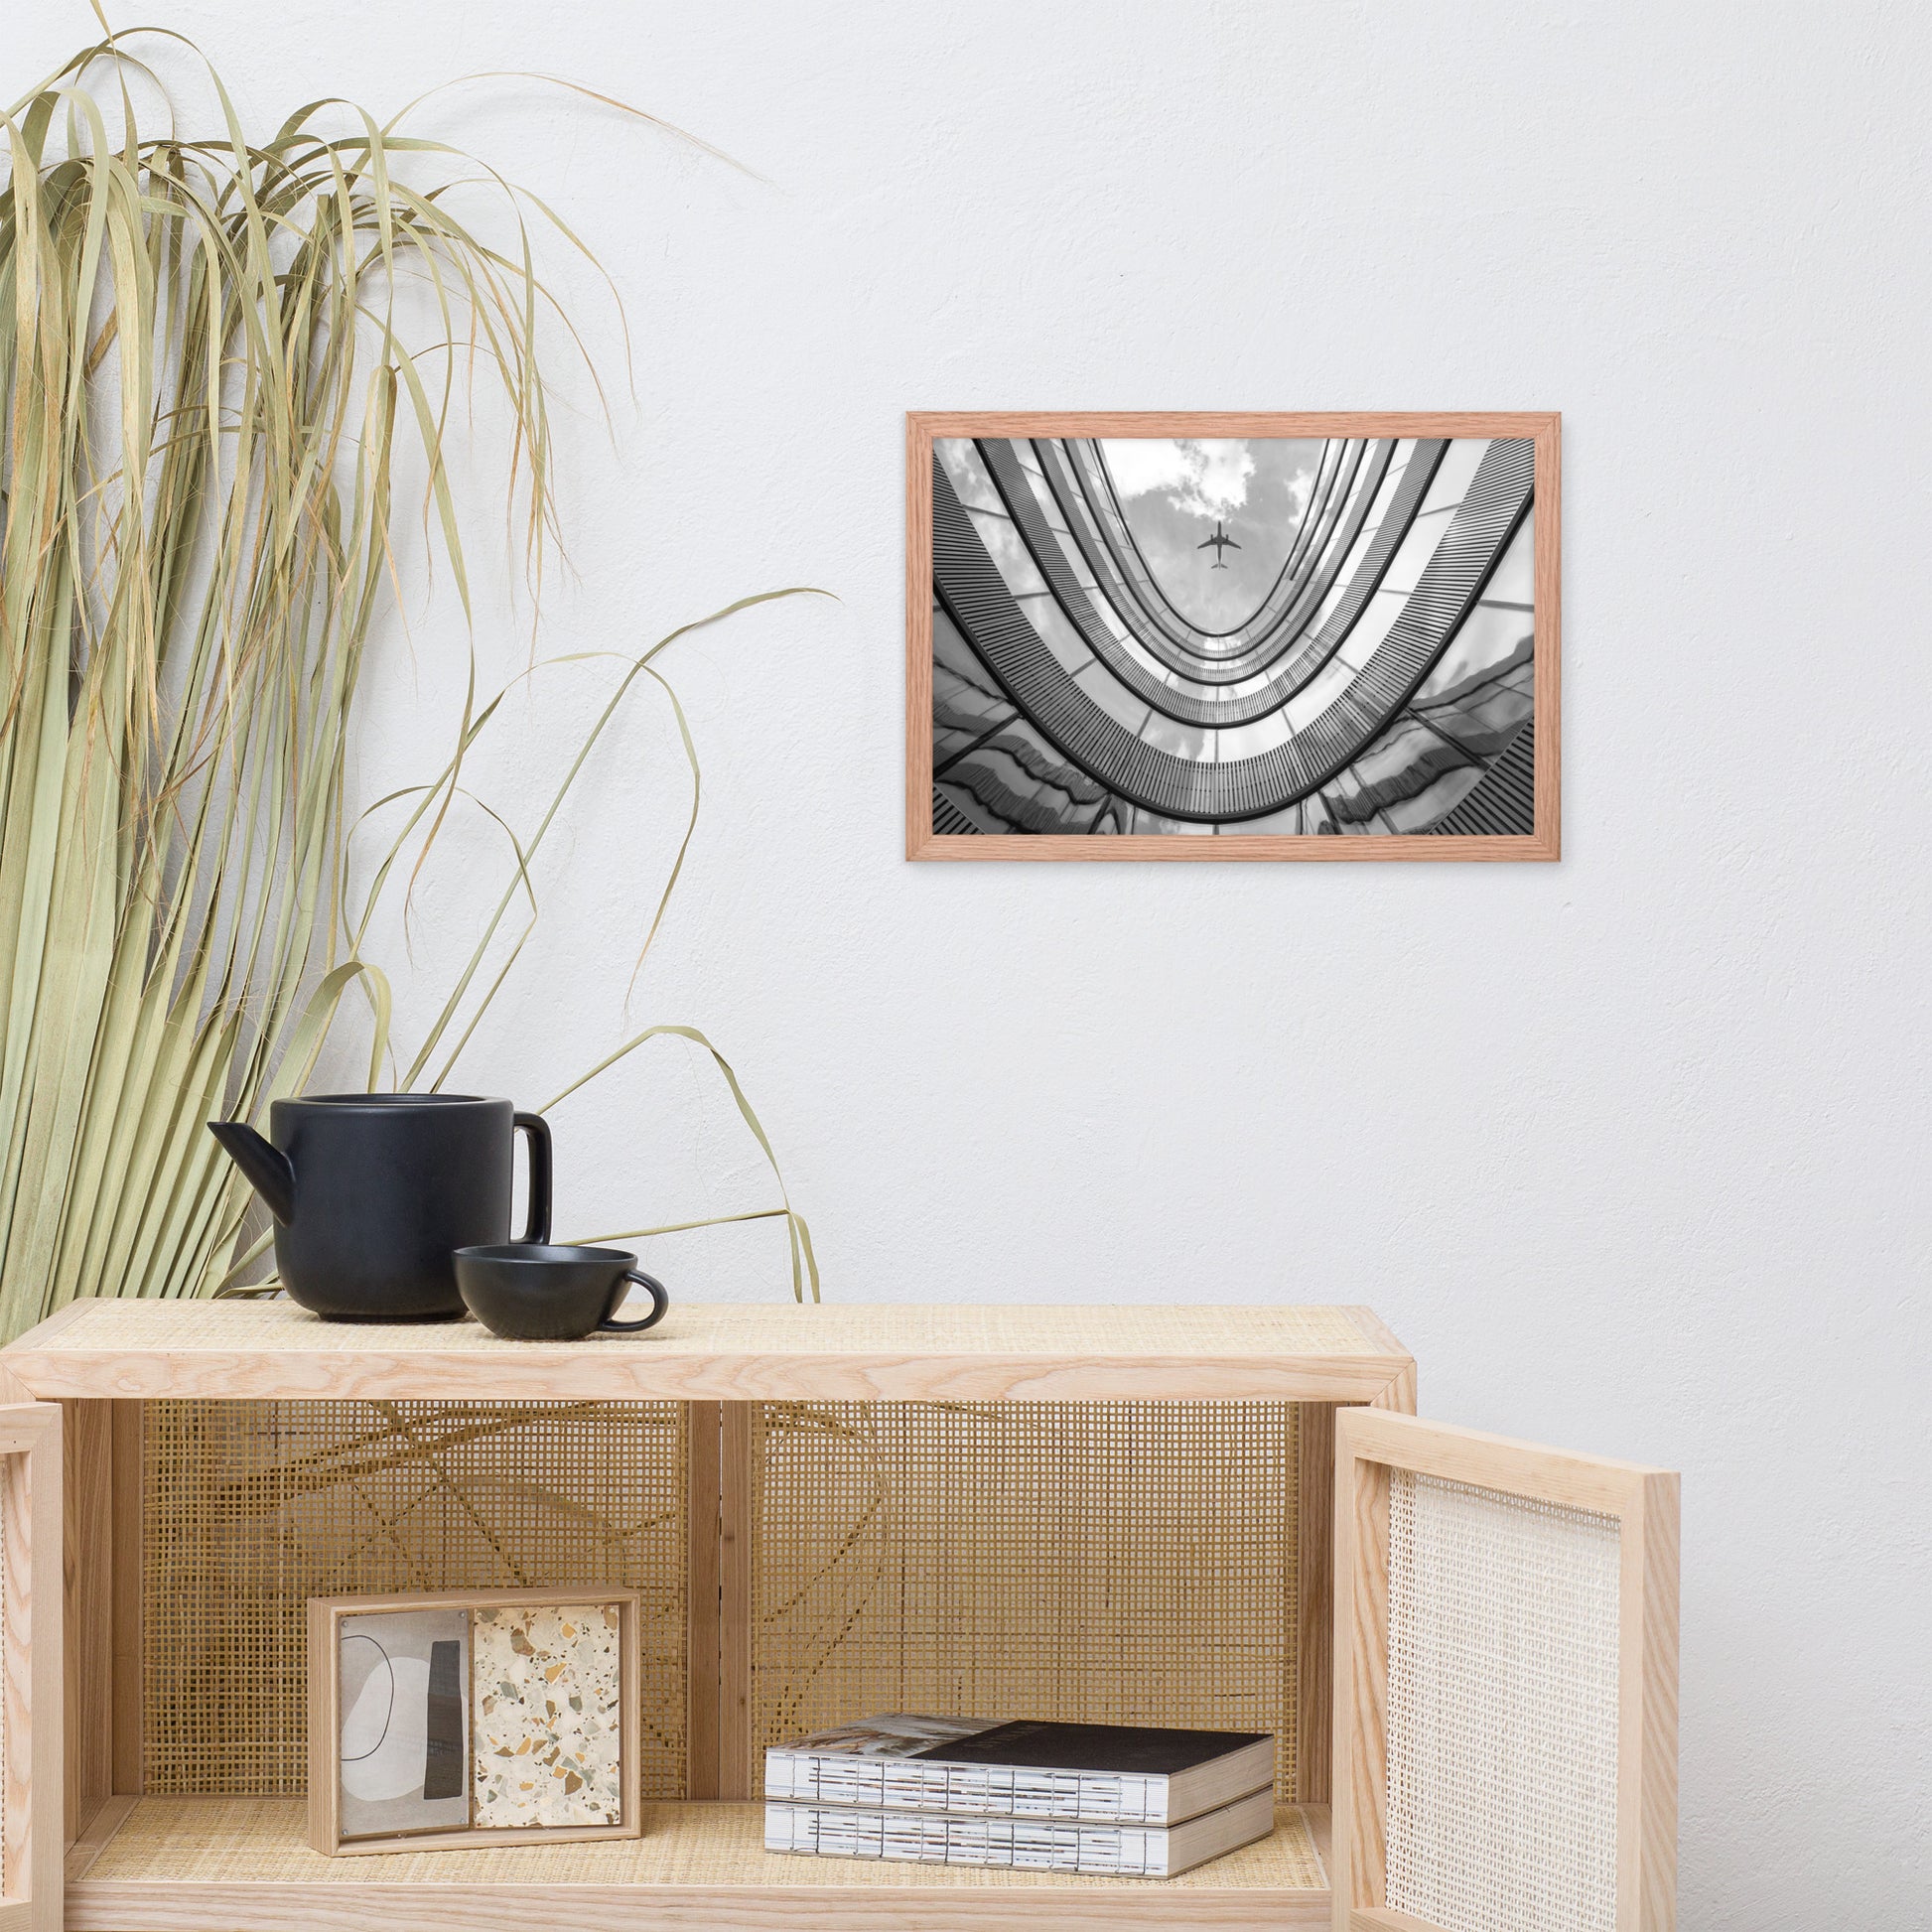 Urban Intersections in the Sky Architectural Photograph Framed Wall Art Print